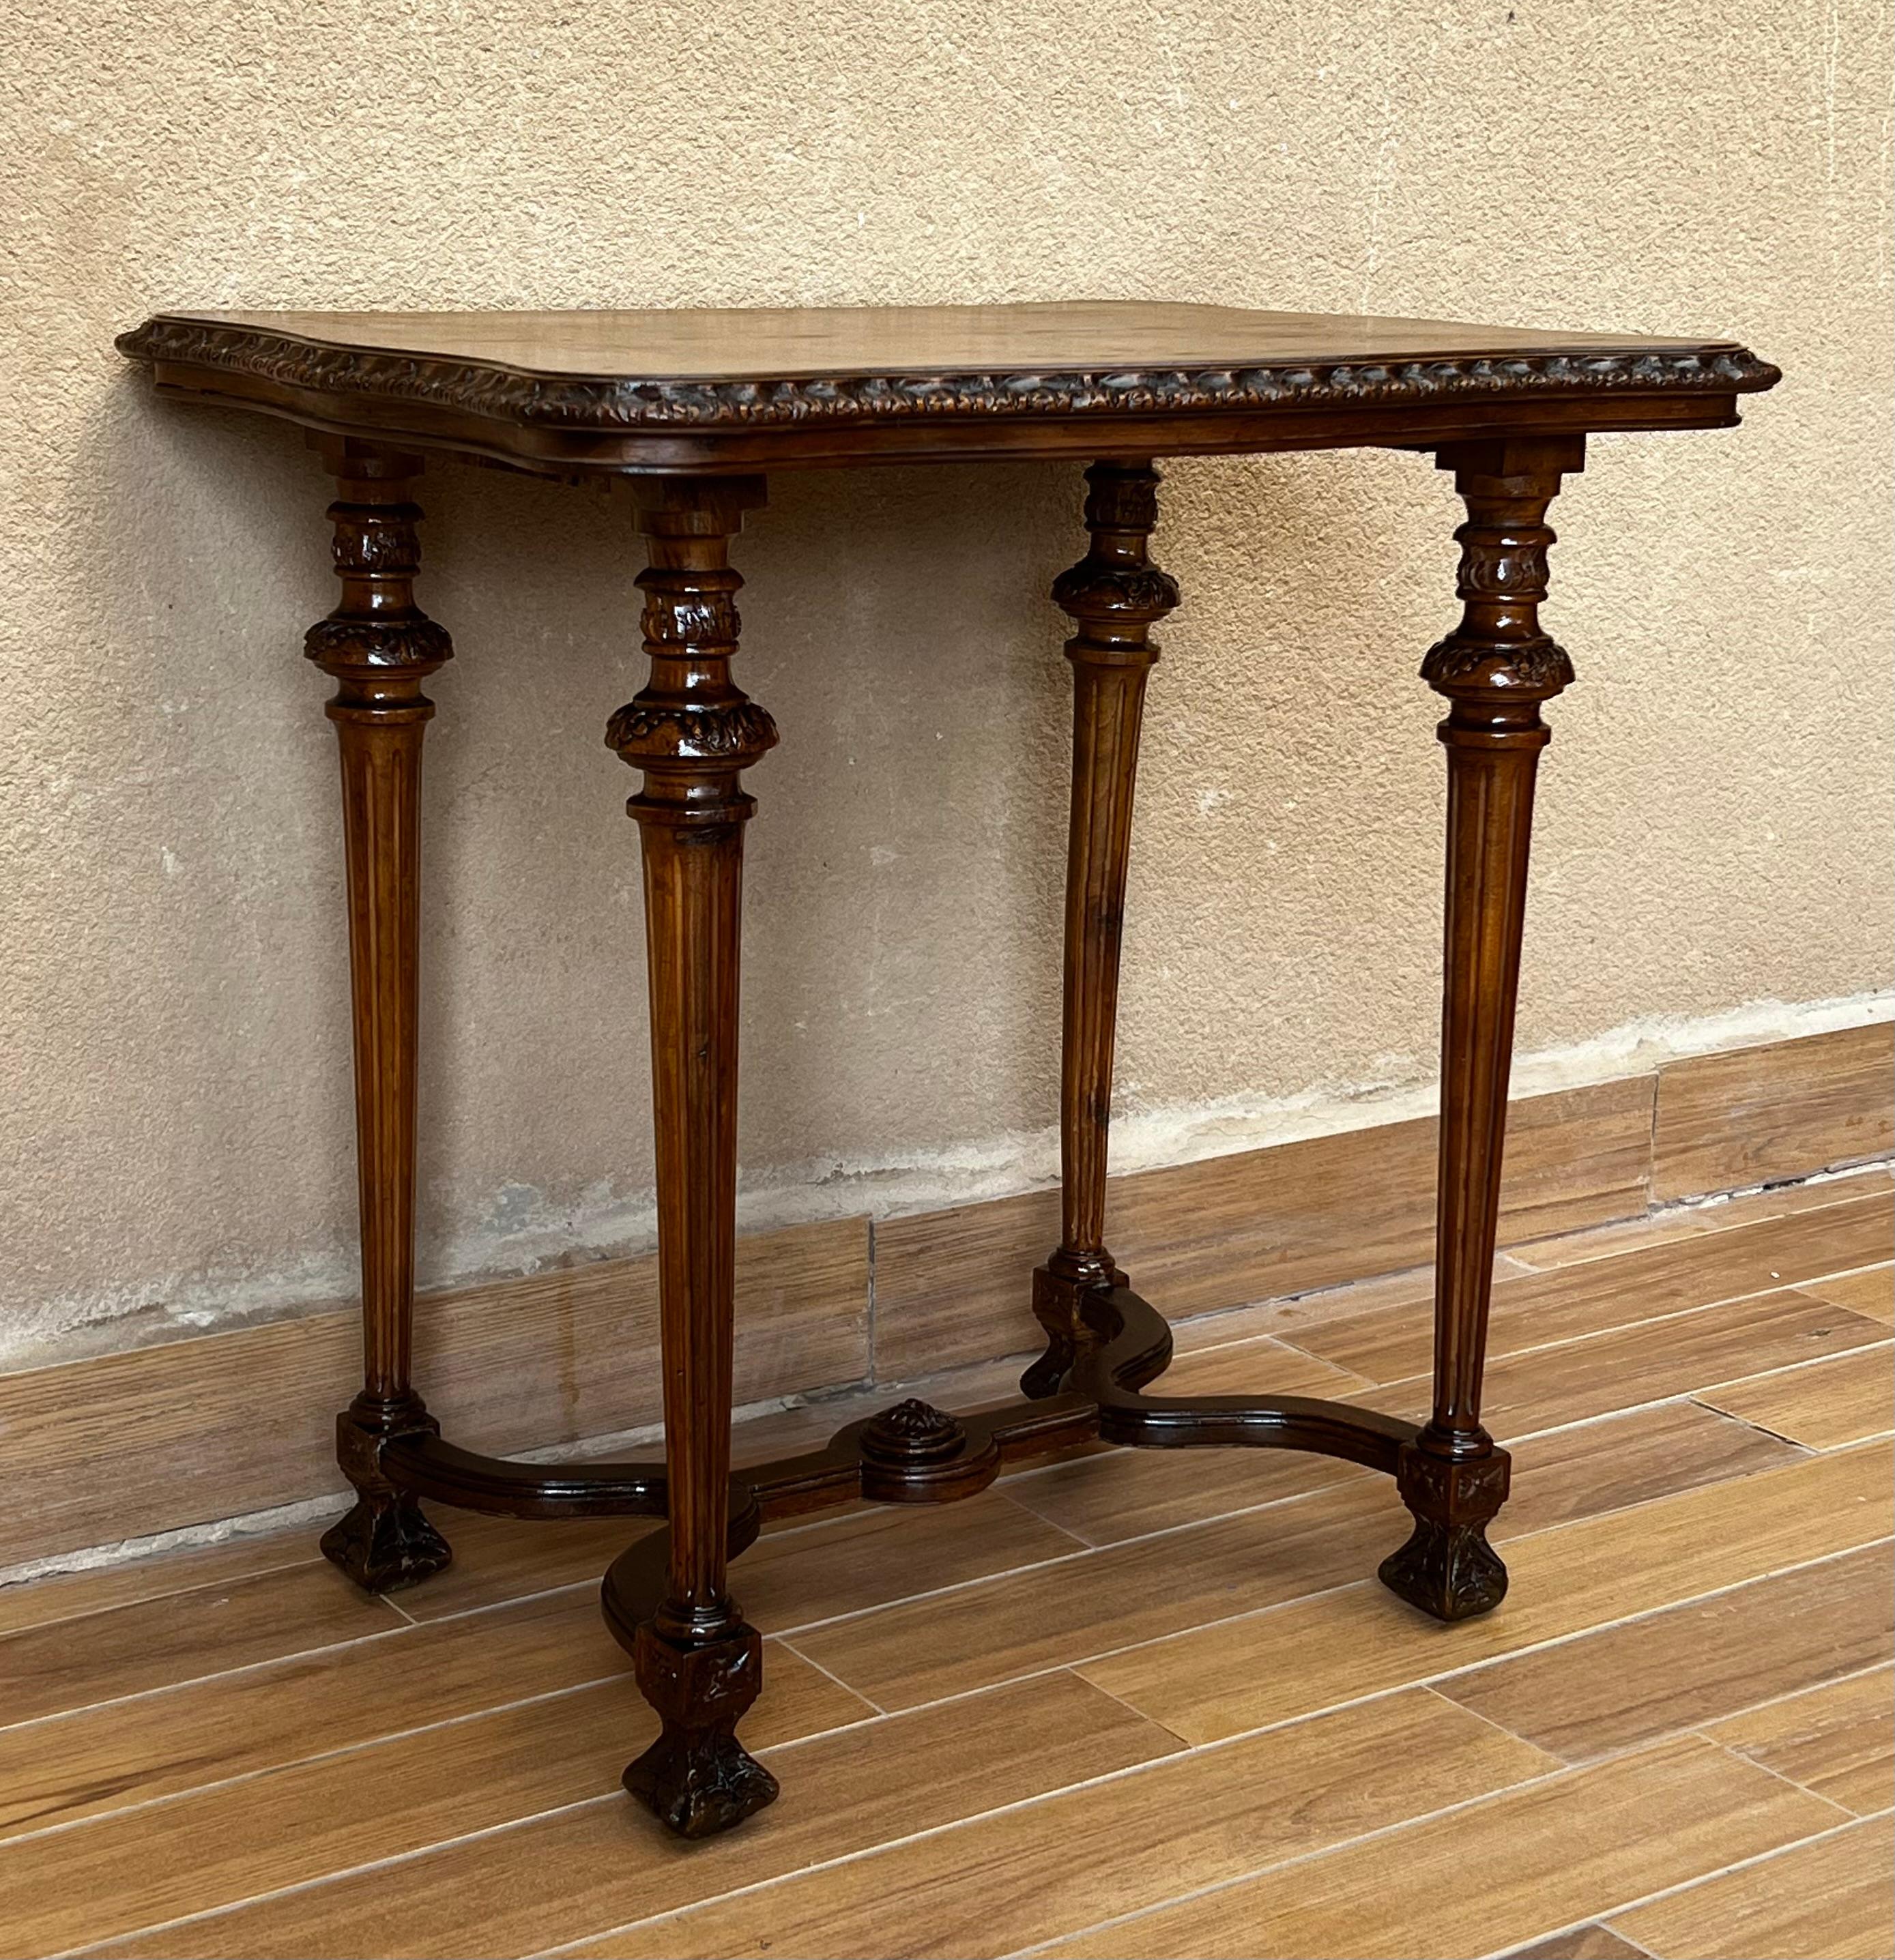 Spanish Italian 1800s Walnut Side Table with Carved Apron and Cabriole Legs